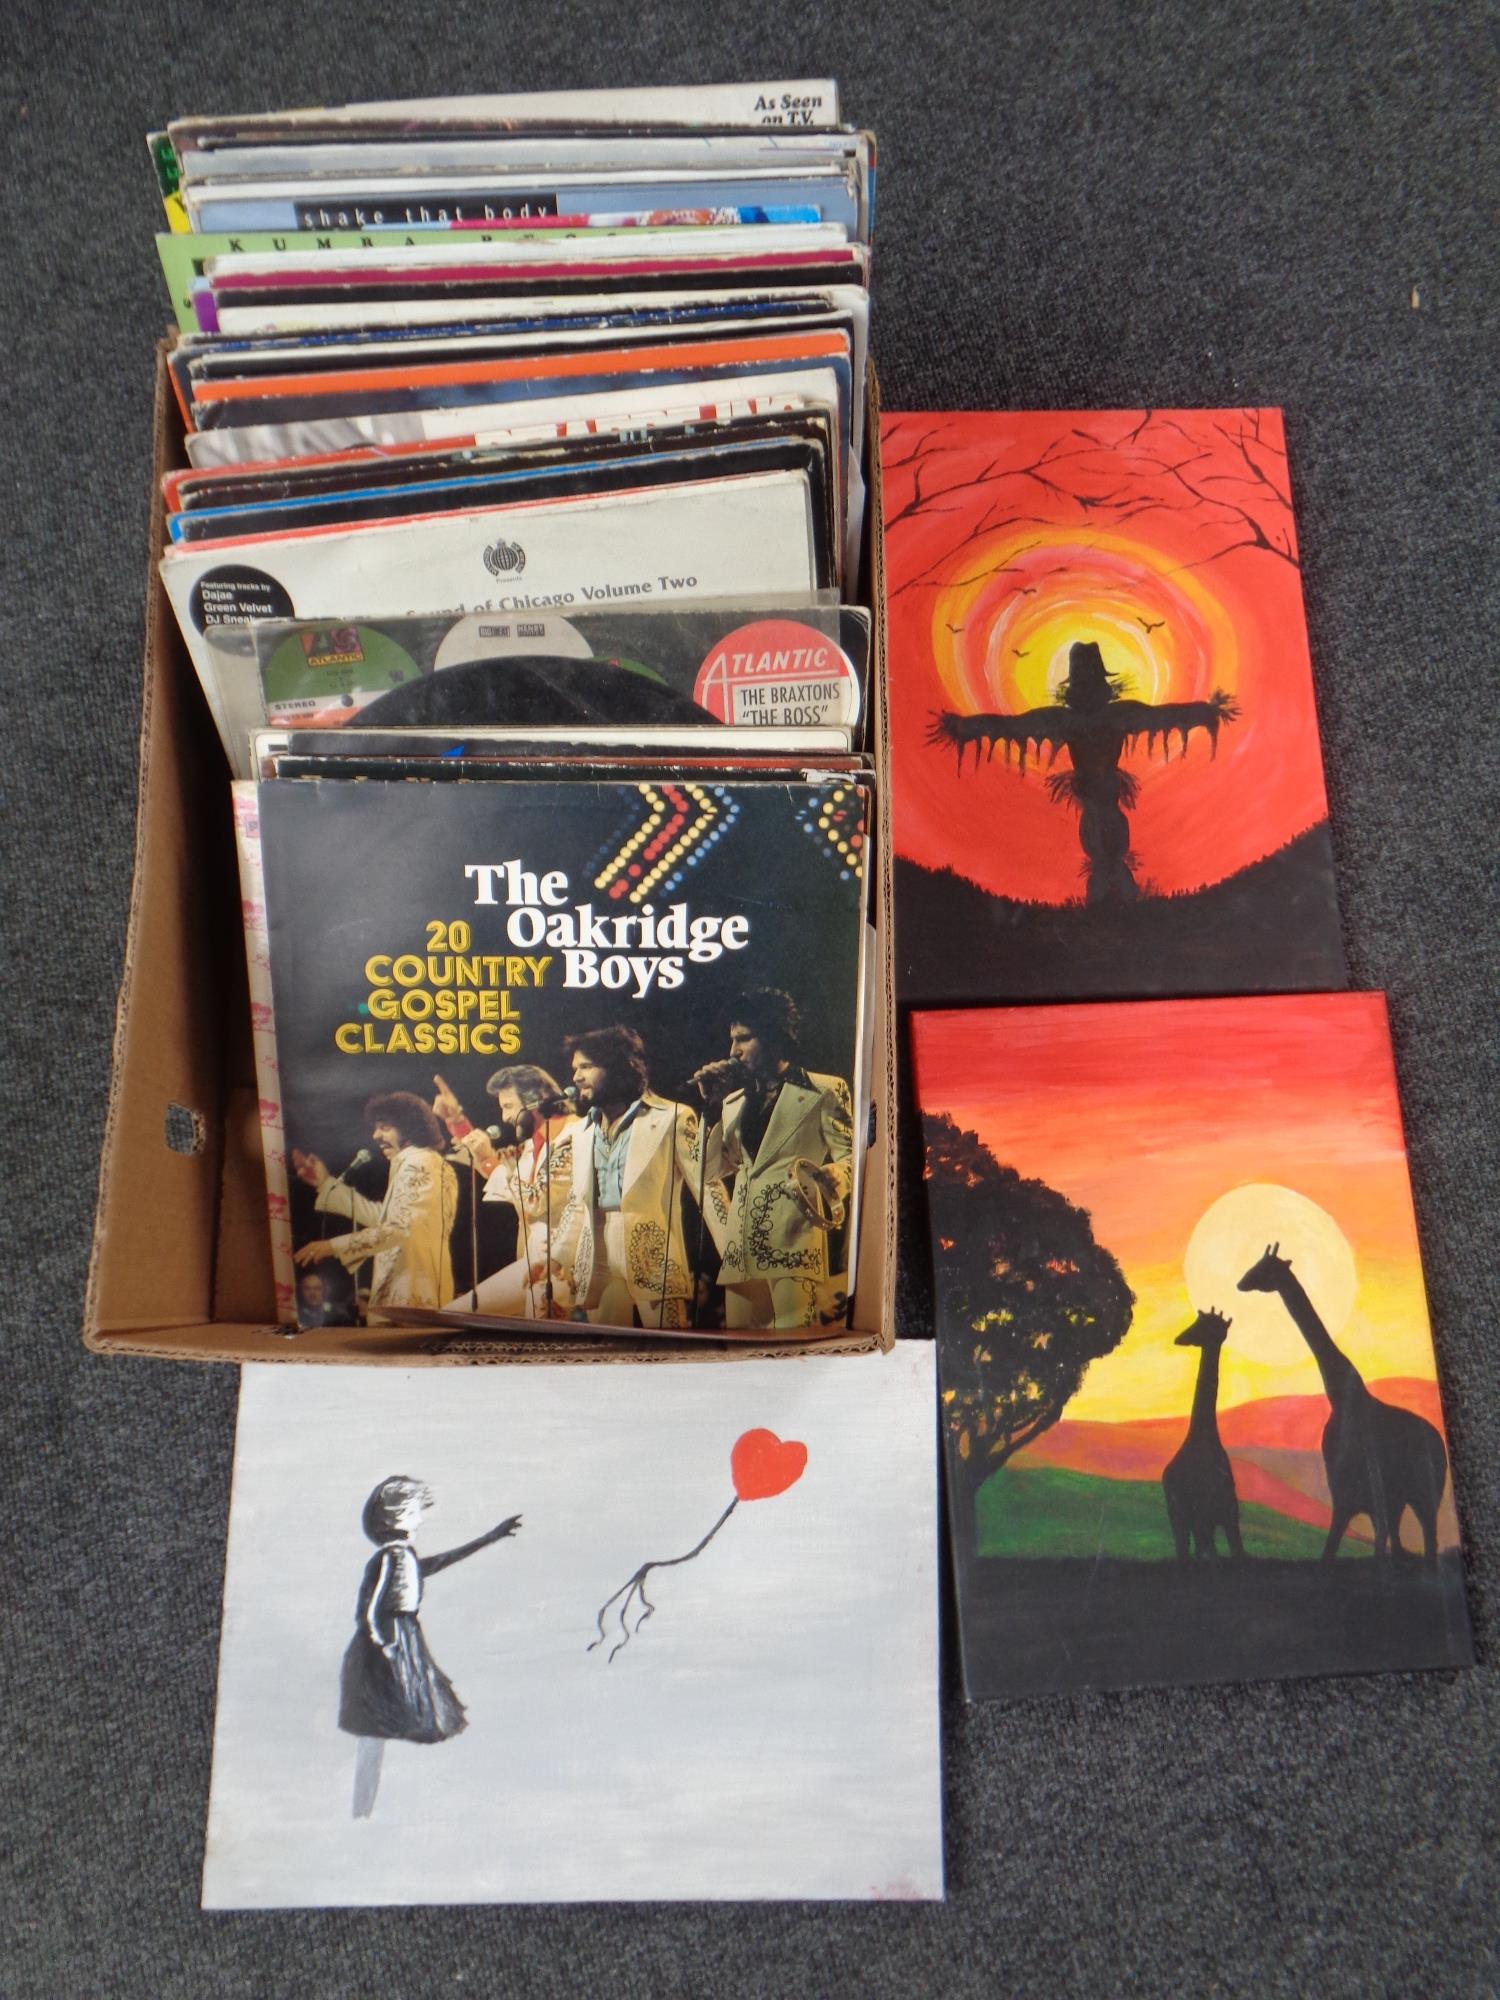 A box containing vinyl LPs including compilations, easy listening etc.